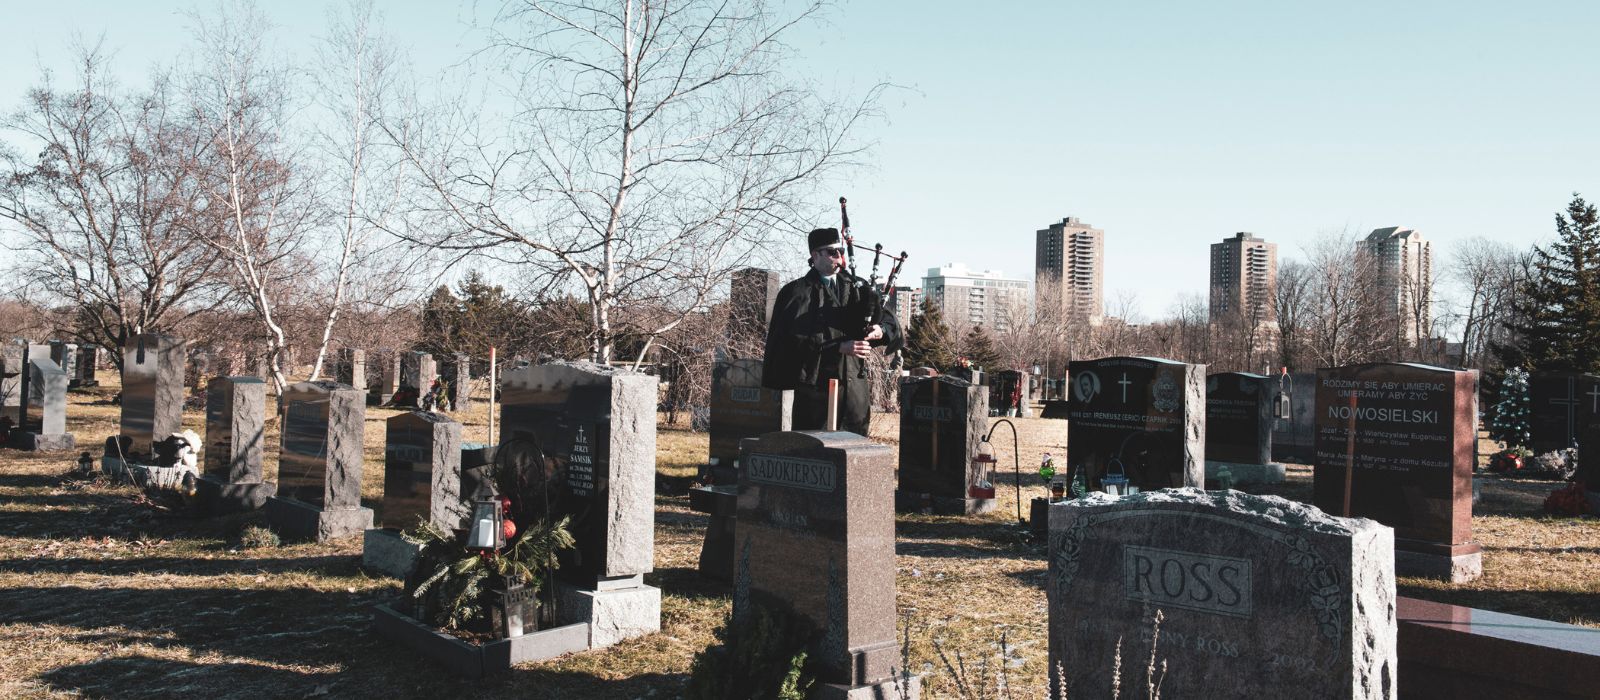 A member of the Ottawa Police Pipe Band playing the bagpipes in a cemetery.